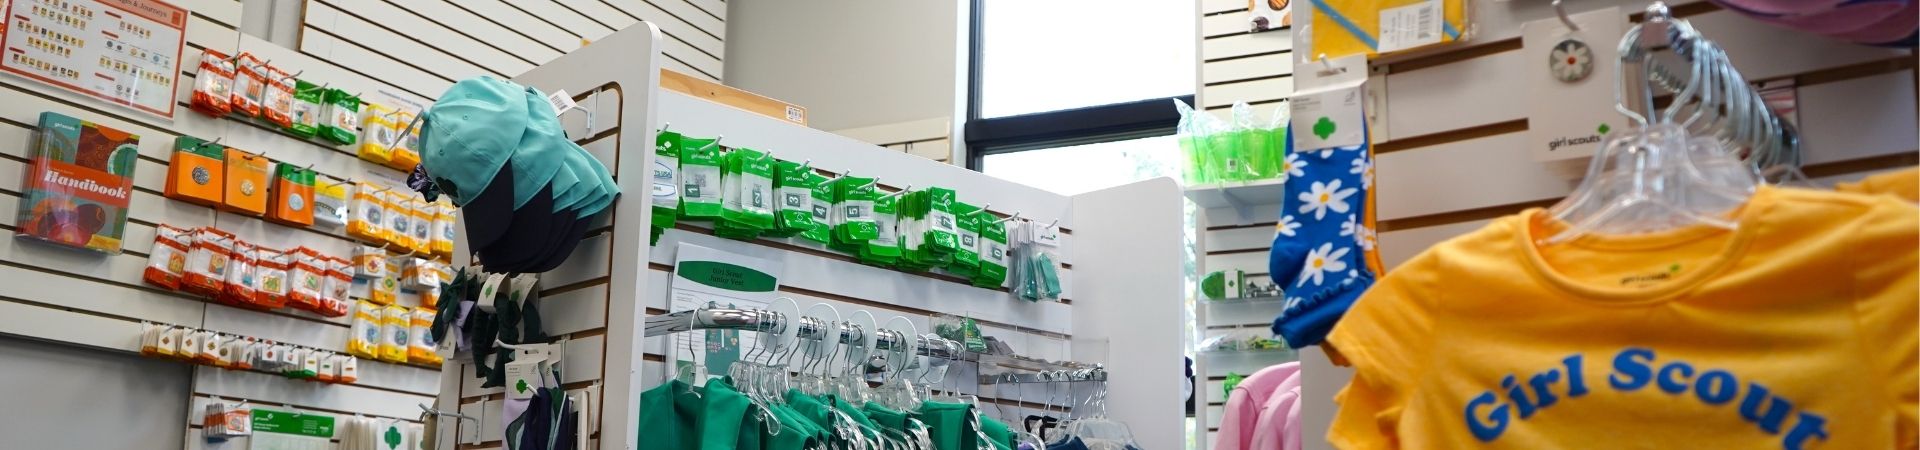  Girl Scout merchandise displayed in our South Portland Shop 